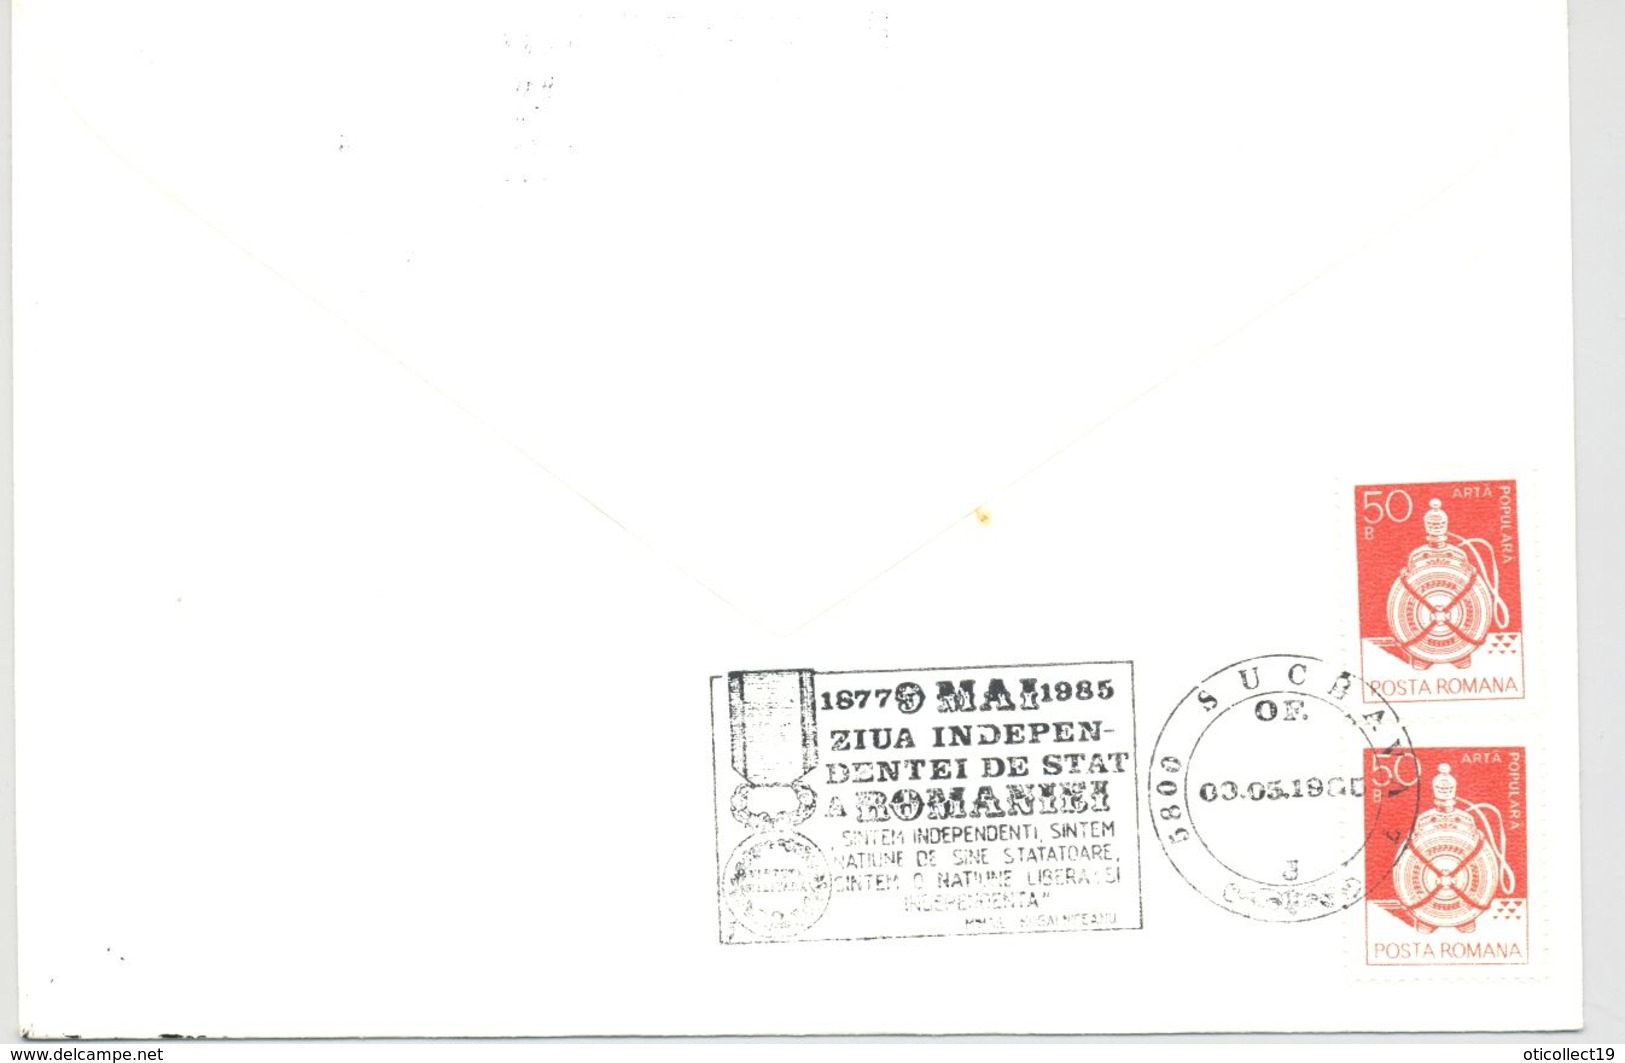 ROMANIAN STATE INDEPENDENCE ANNIVERSARY, SPECIAL POSTMARK ON COVER, POTTERY STAMP, 1985, ROMANIA - Storia Postale